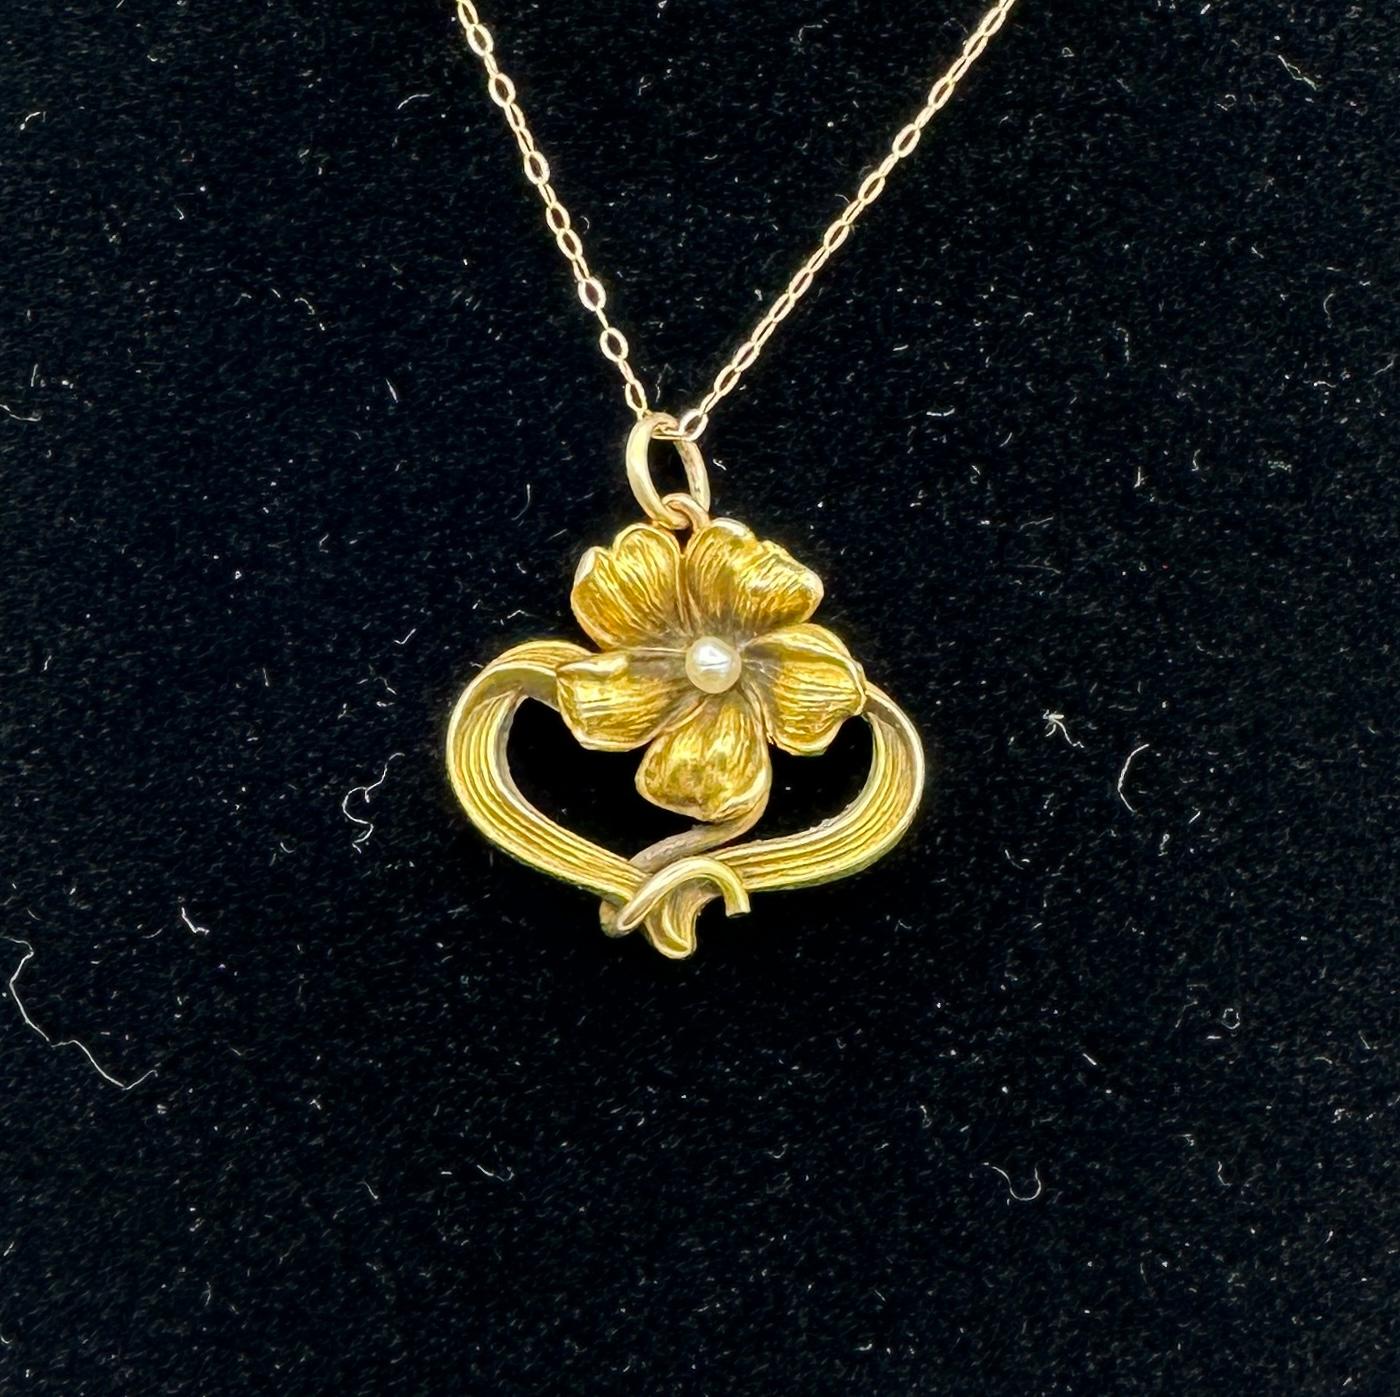 THIS IS A GORGEOUS VICTORIAN - ART NOUVEAU PENDANT IN THE FORM OF A BEAUTIFUL  FLOWER WITH A PEARL IN THE CENTER.  THE FLOWER IS SET IN AN ELEGANT GOLD RIBBON SURROUND WITH LOVELY ART NOUVEAU DESIGN.  THE PENDANT IS 10 KARAT YELLOW GOLD.  THIS IS